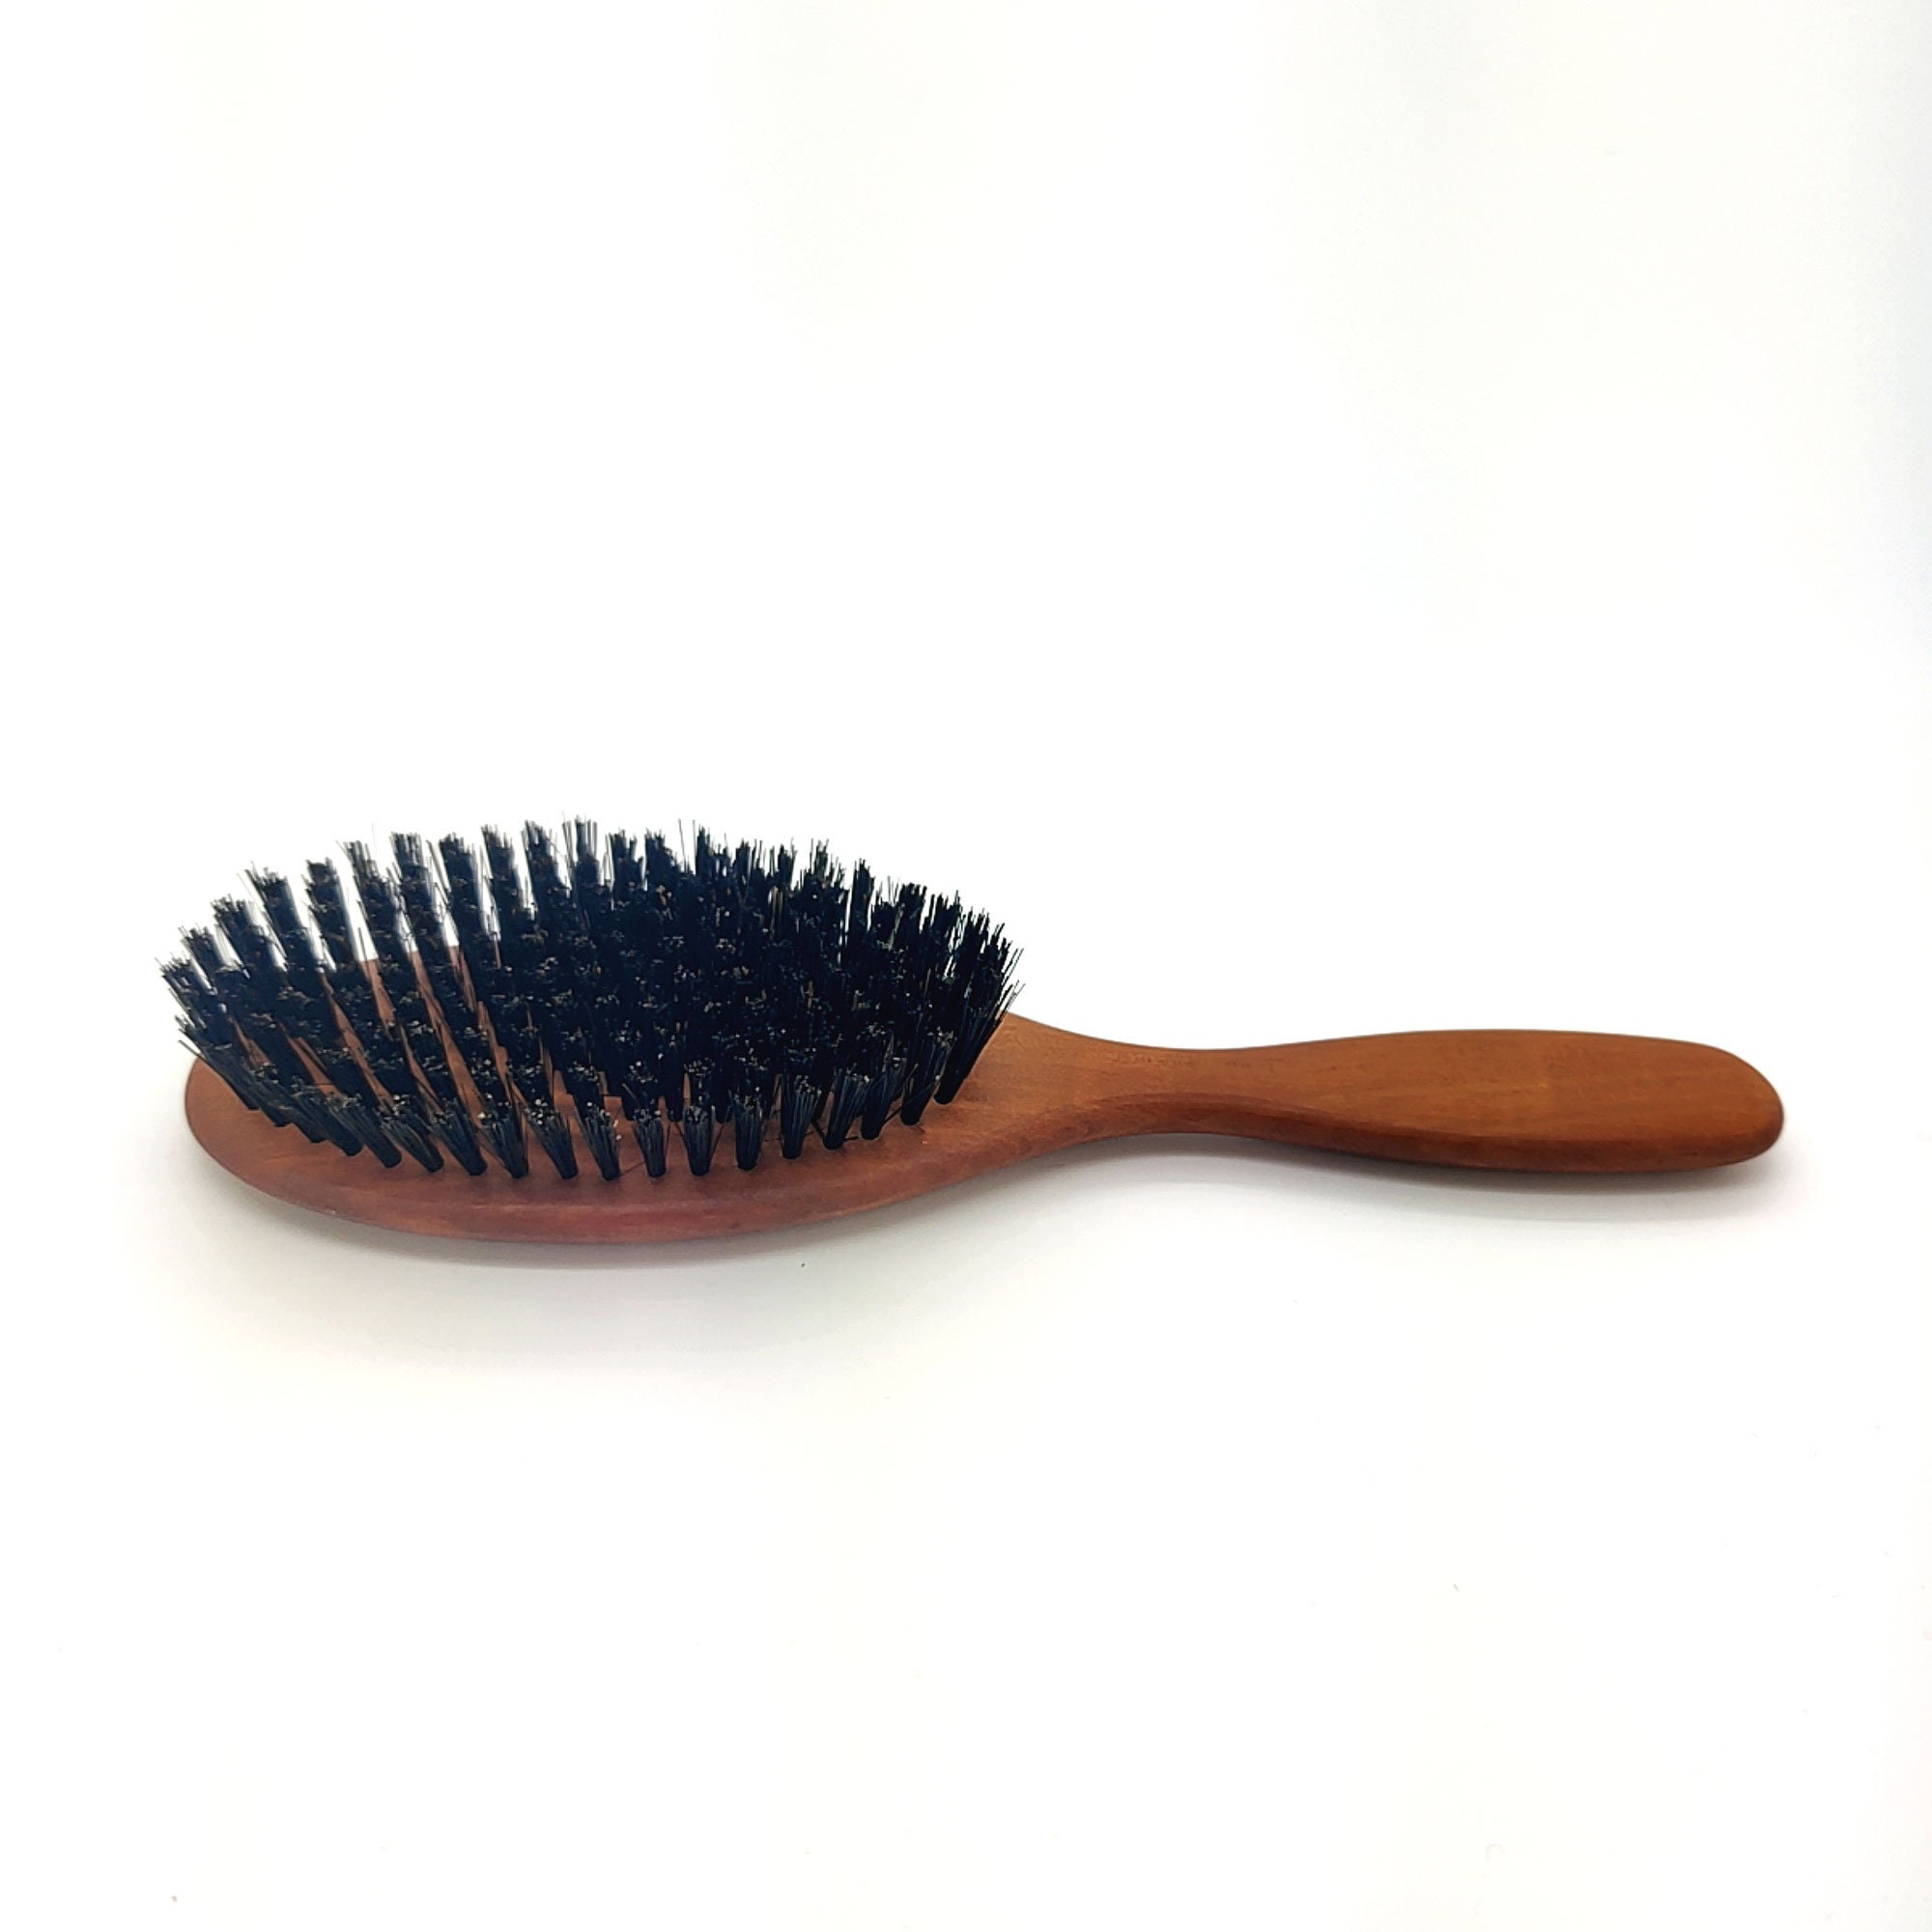 USA Made Natural Color BOAR Hair Brush Wood Handle Stained Beechwood 7.5 Bristle  Soft Medium Styling Beard Dixie Cowboy Q05 